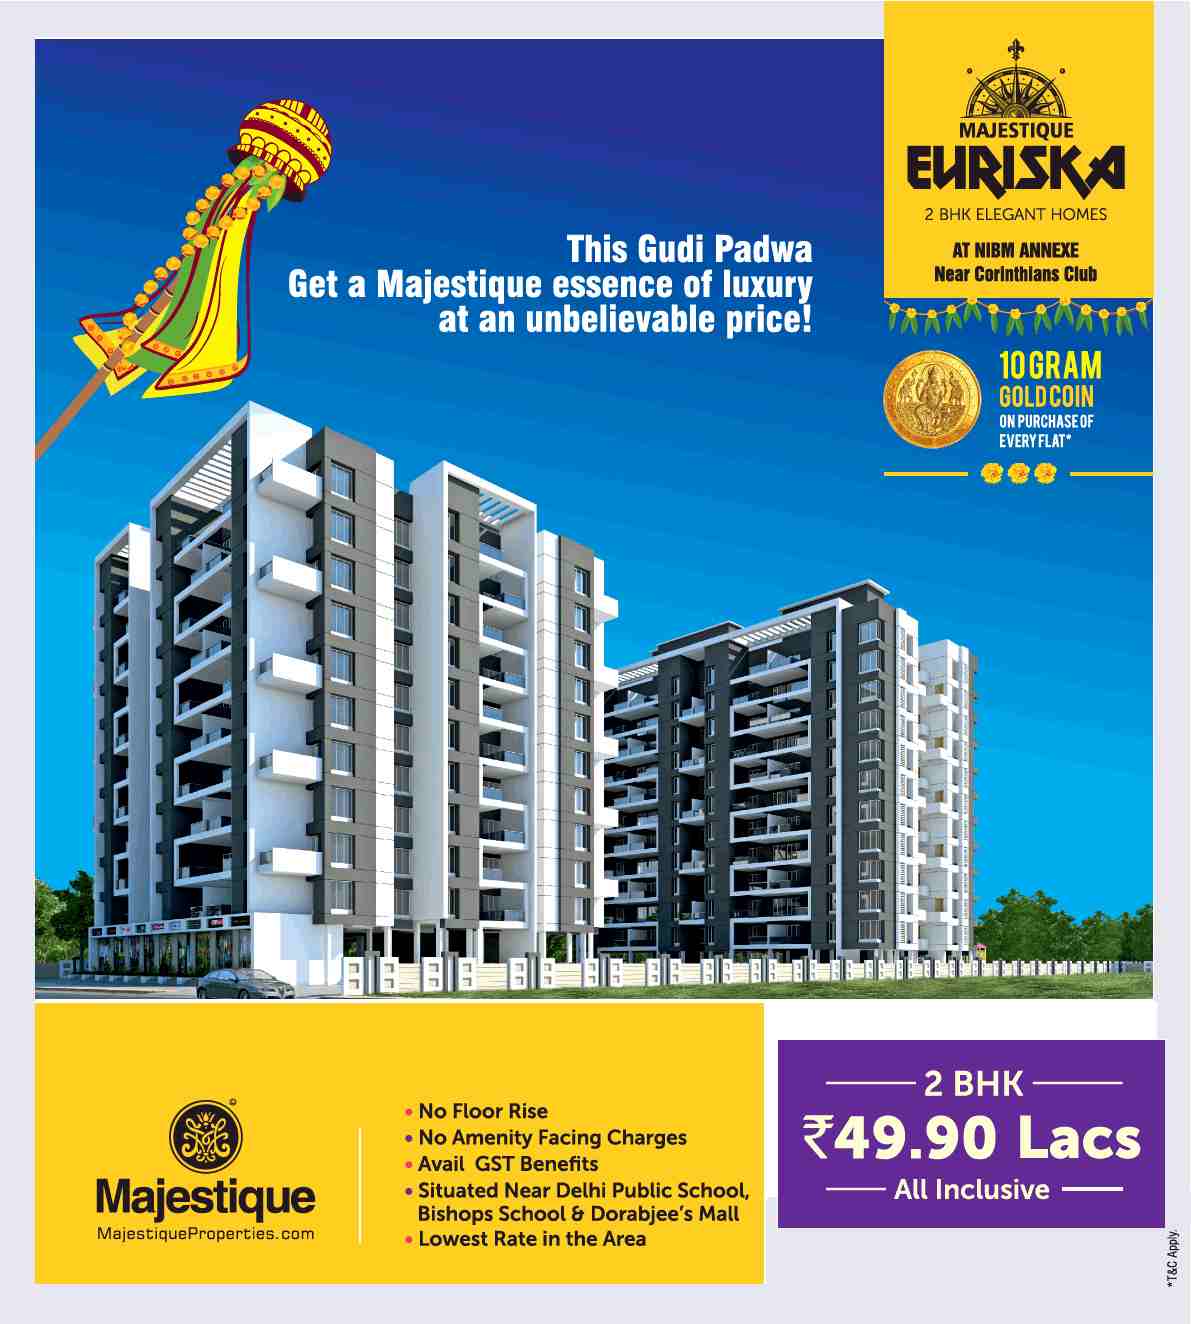 Get a majestique essence of luxury at unbelievable price at Majestique Euriska in Pune